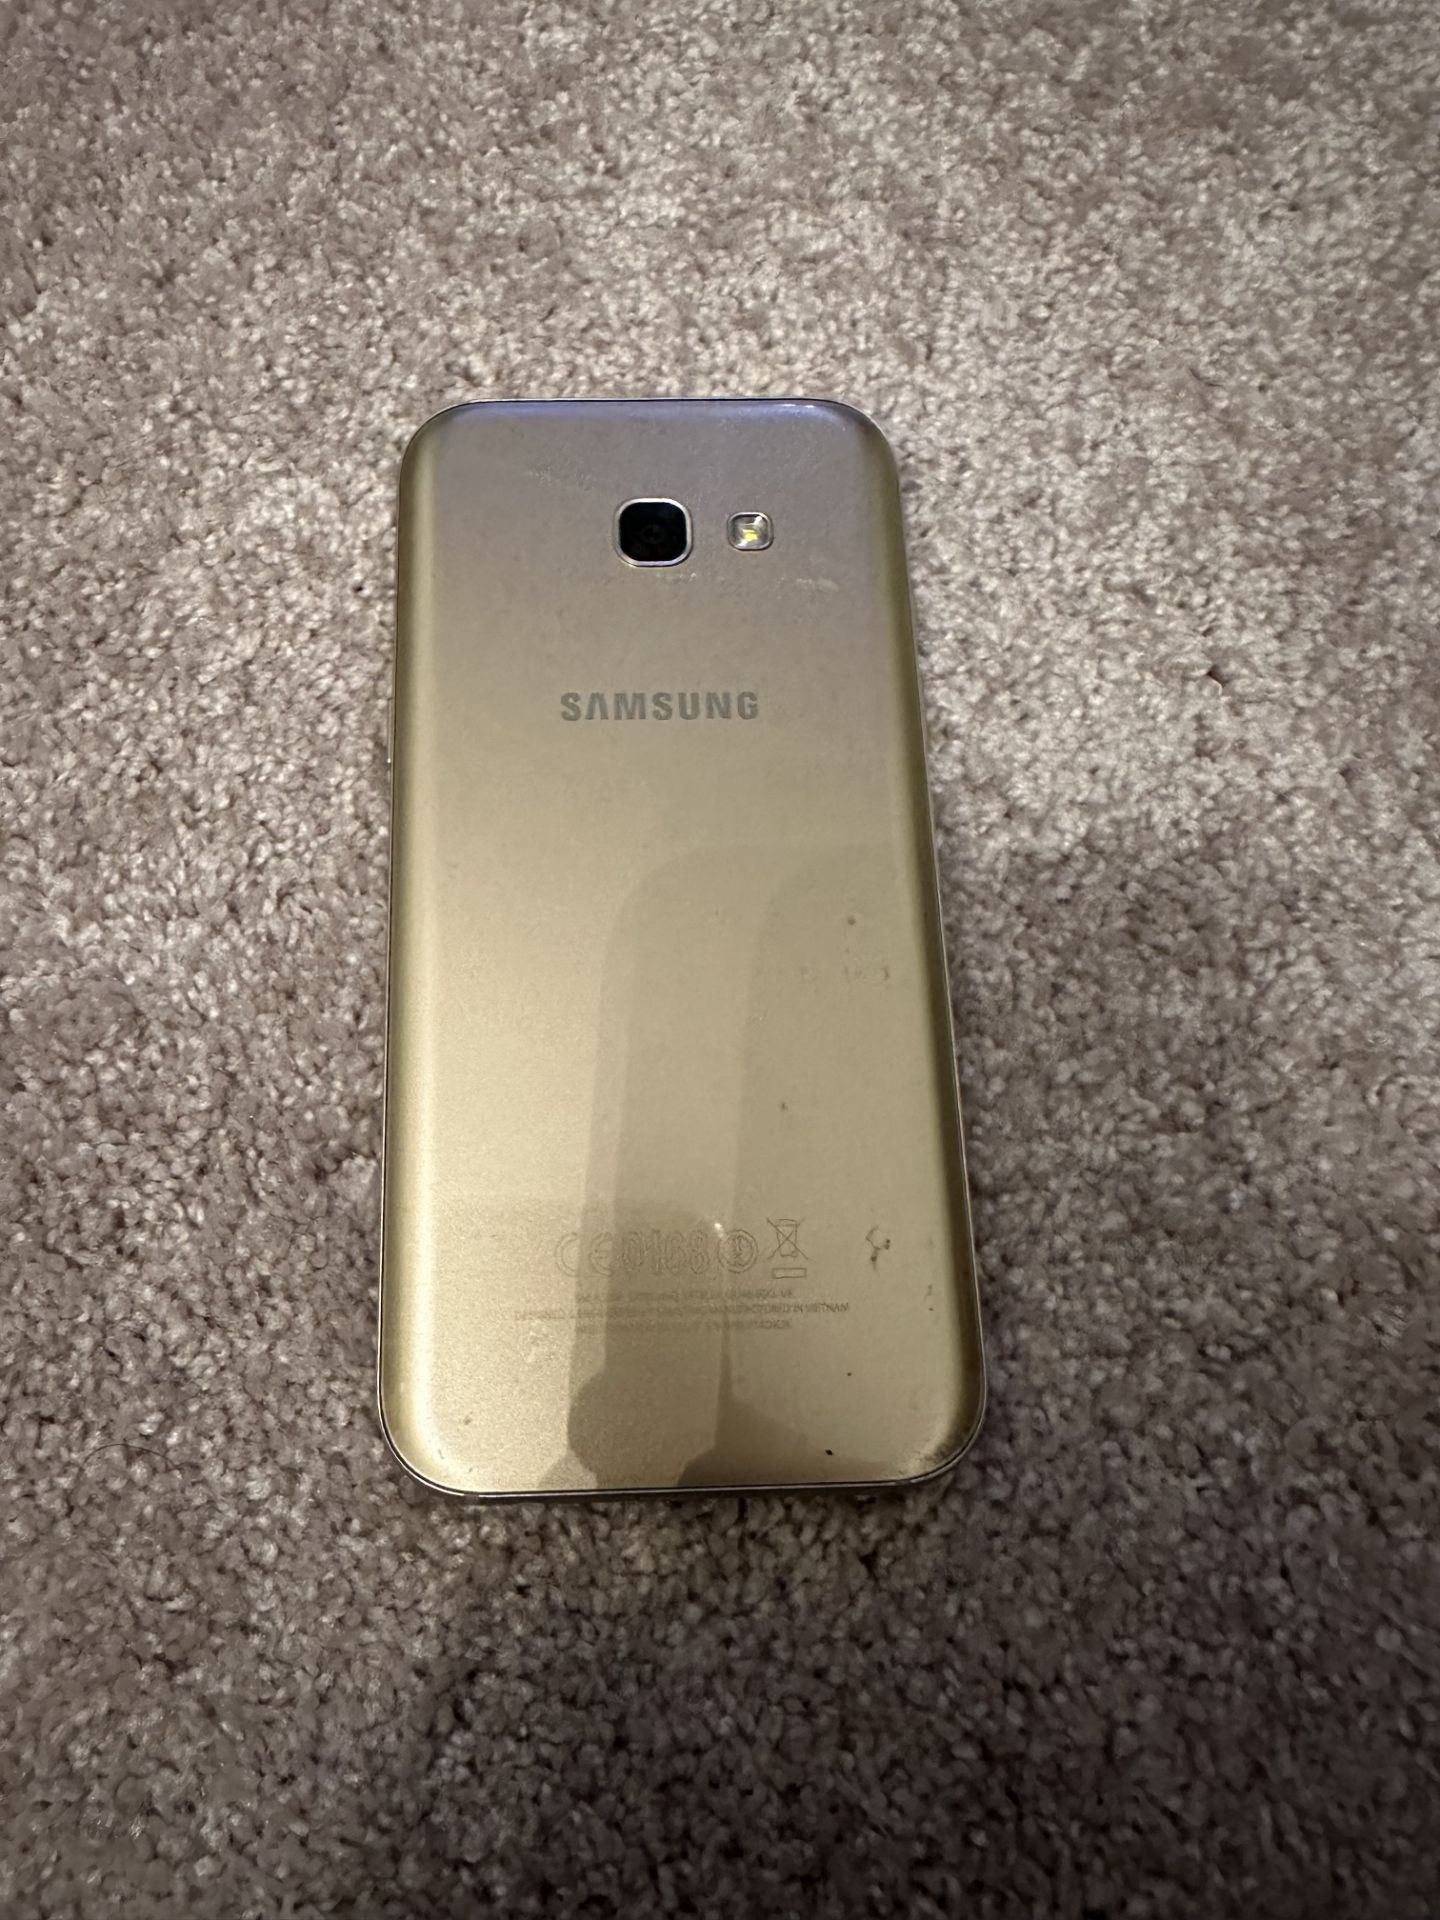 Samsung A5 Gold - No VAT - Untested - Image 2 of 2